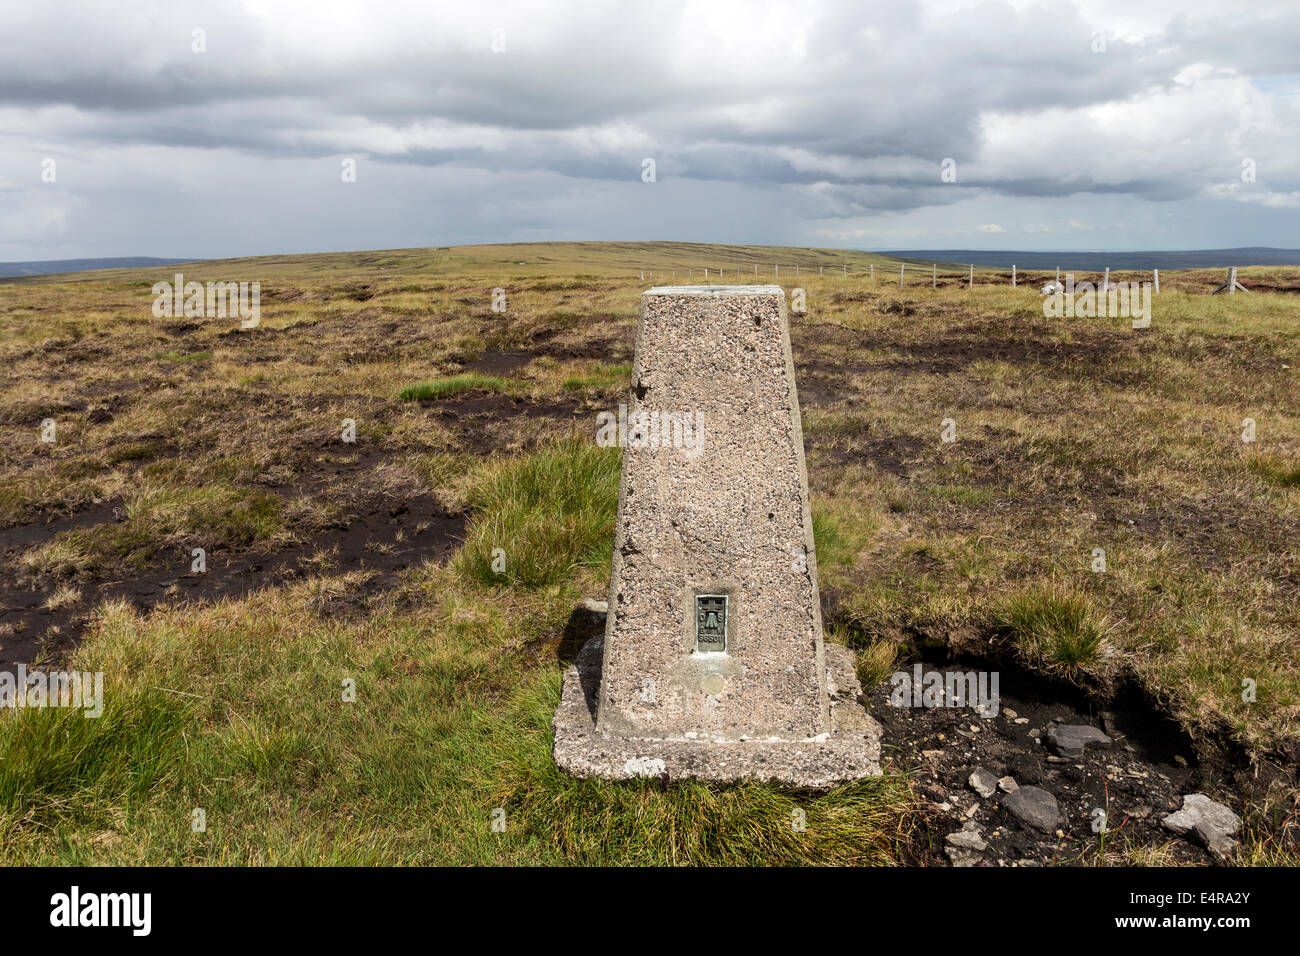 The Summit of Fendrith Hill and the View North Towards Chappelfell Top Teesdale County Durham UK Stock Photo